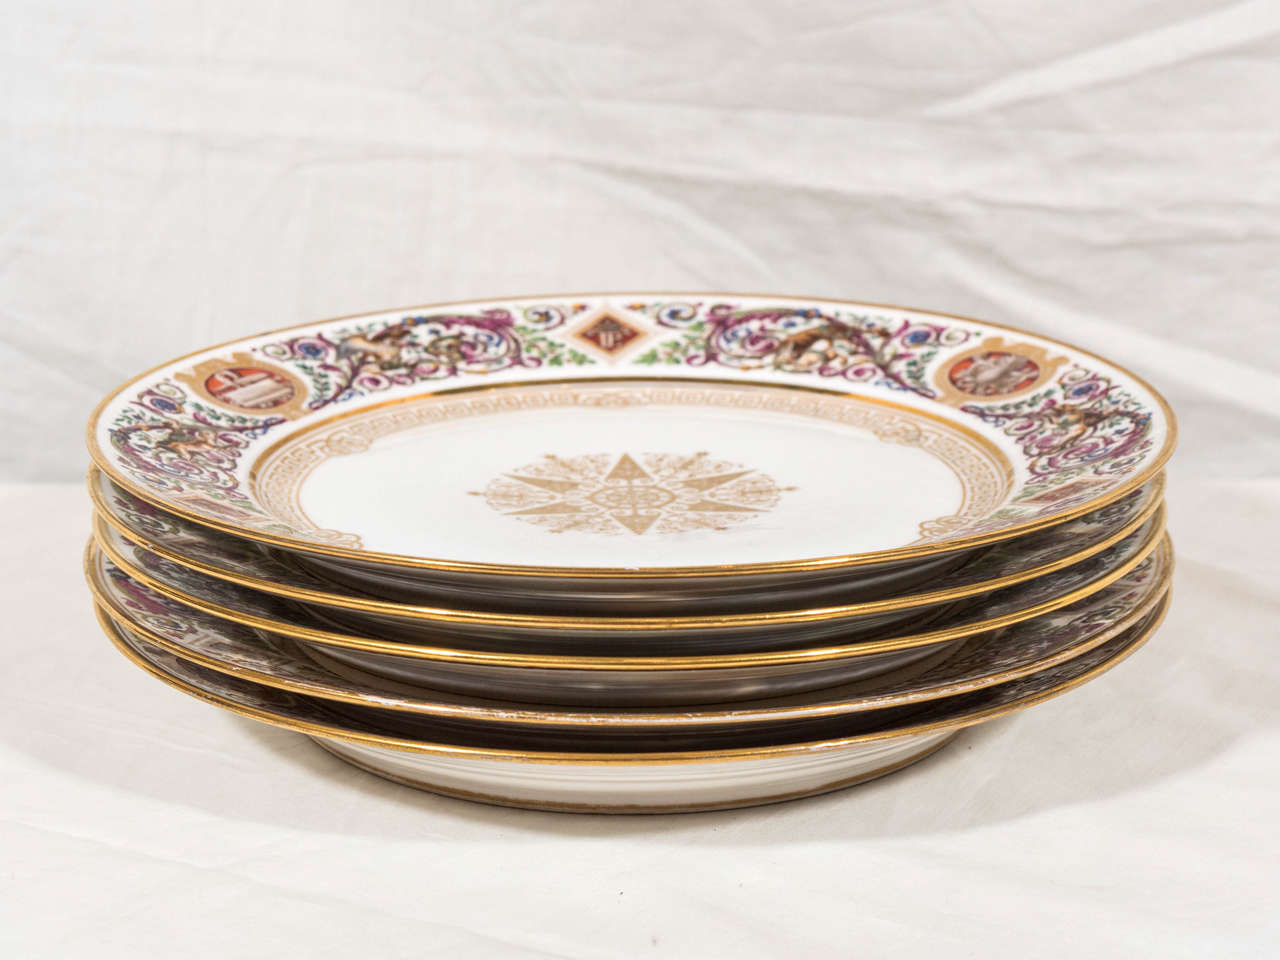 Mid-19th Century Set of Sèvres Dishes from the Hunting Service of Louis Philippe King of France